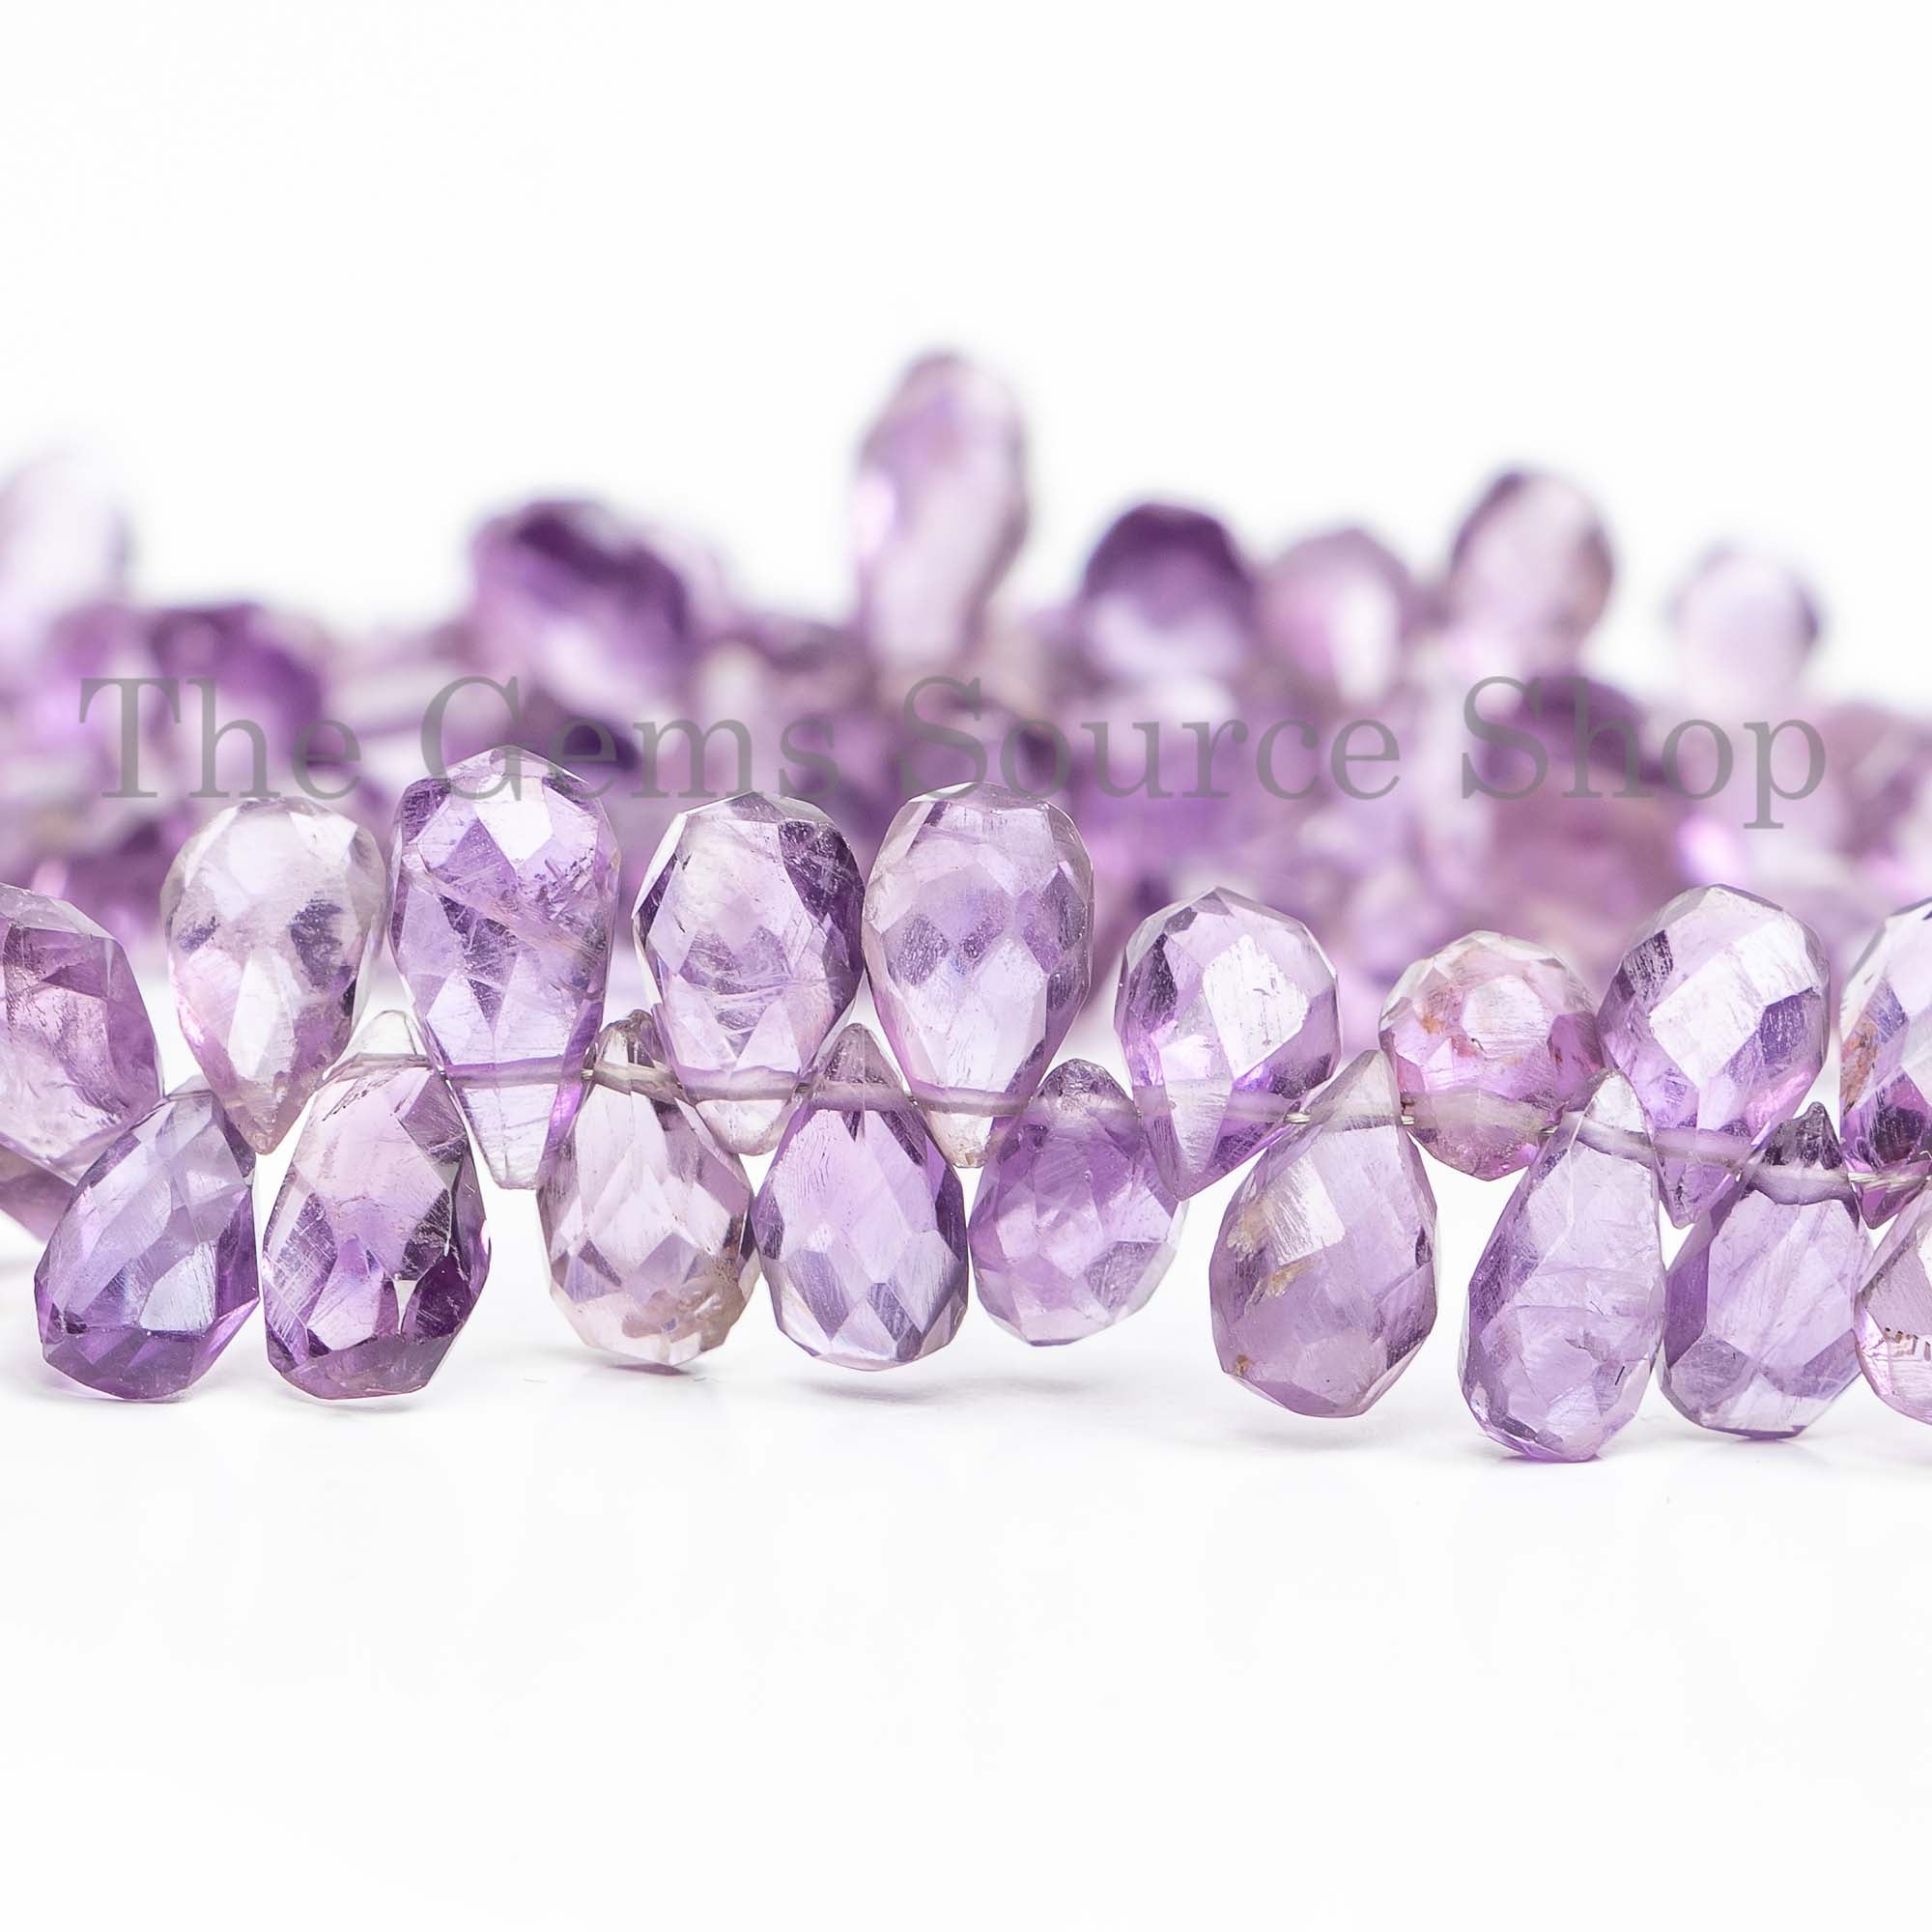 Amethyst Faceted Pear Beads Wholesale Amethyst Beads, Pear Shape Beads, Amethyst Side Drill Beads, Gemstone Beads